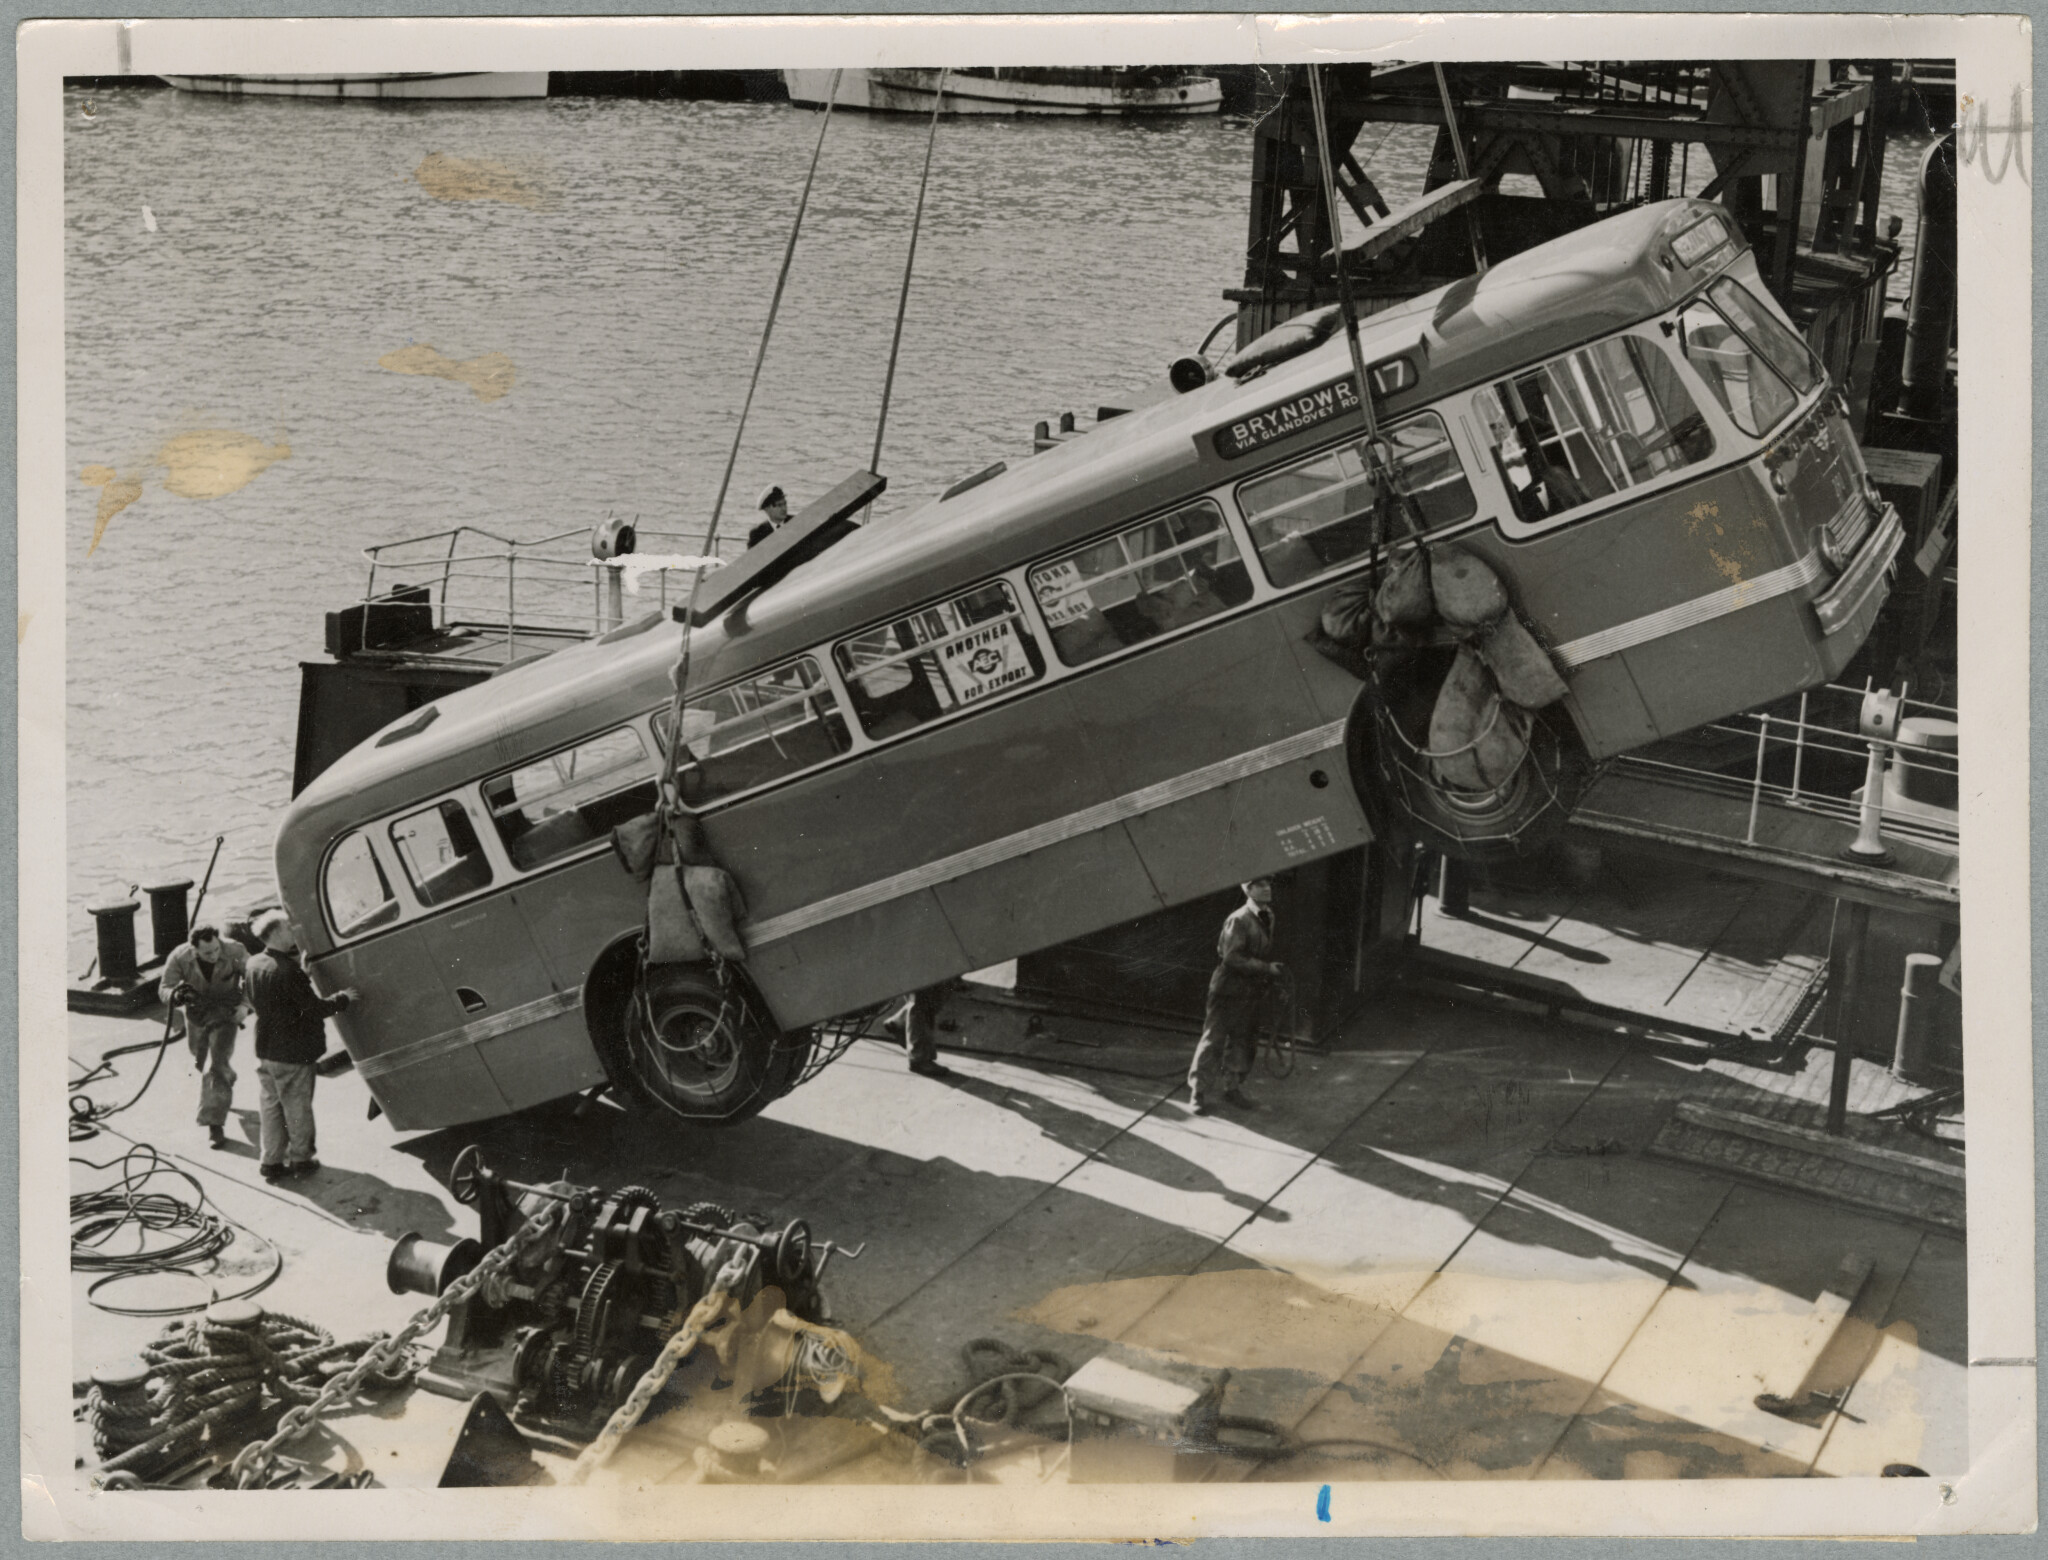 Unloading the new diesel bus. 2 August 1954. Christchurch Star archive. In copyright. CCL-StarP-04189A.